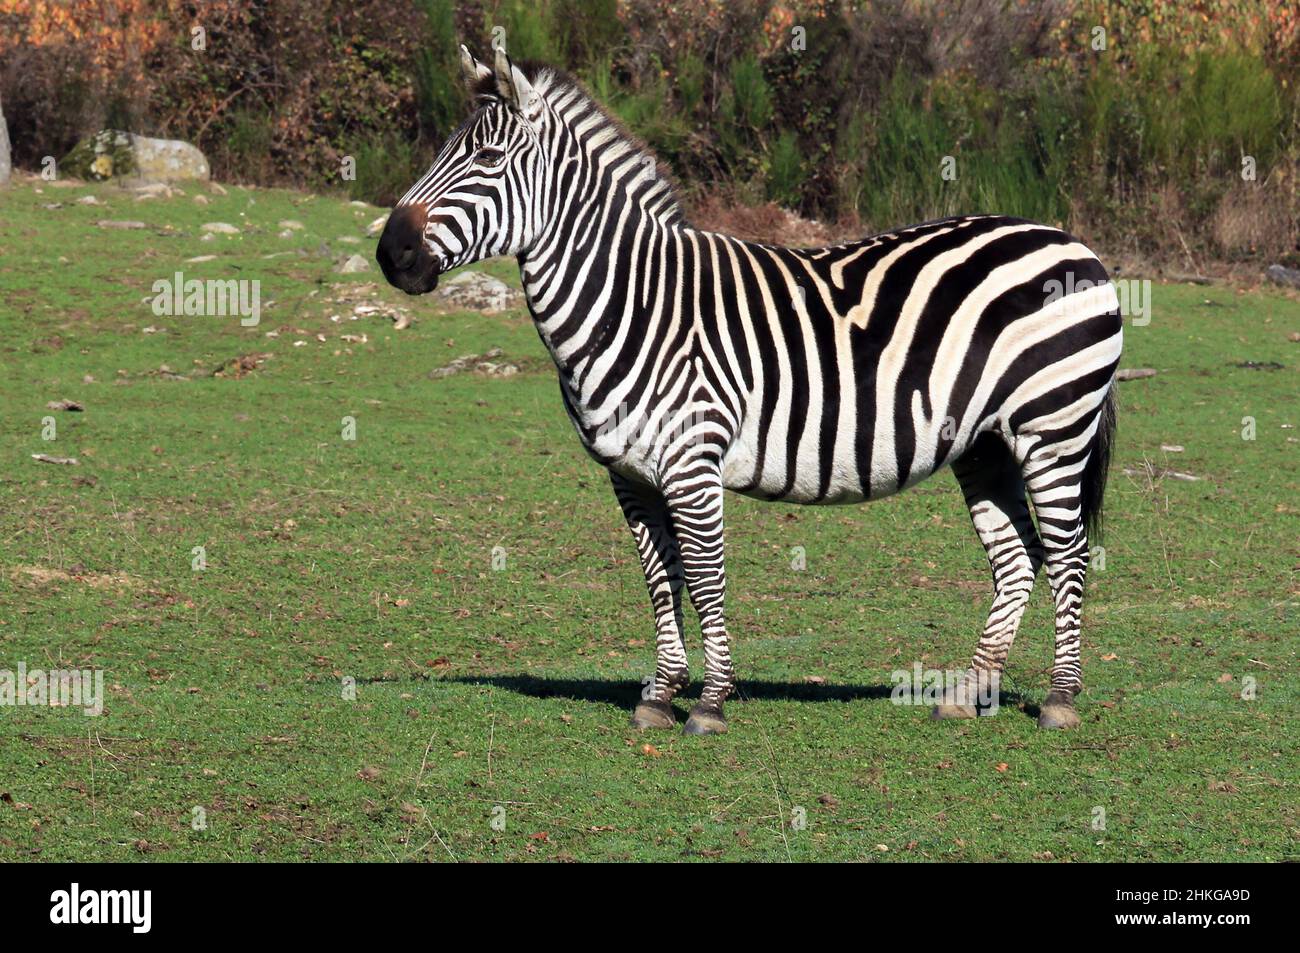 Adult zebra in the sun in its striped dress.They belong to the genus Equus. They live in Africa. Stock Photo